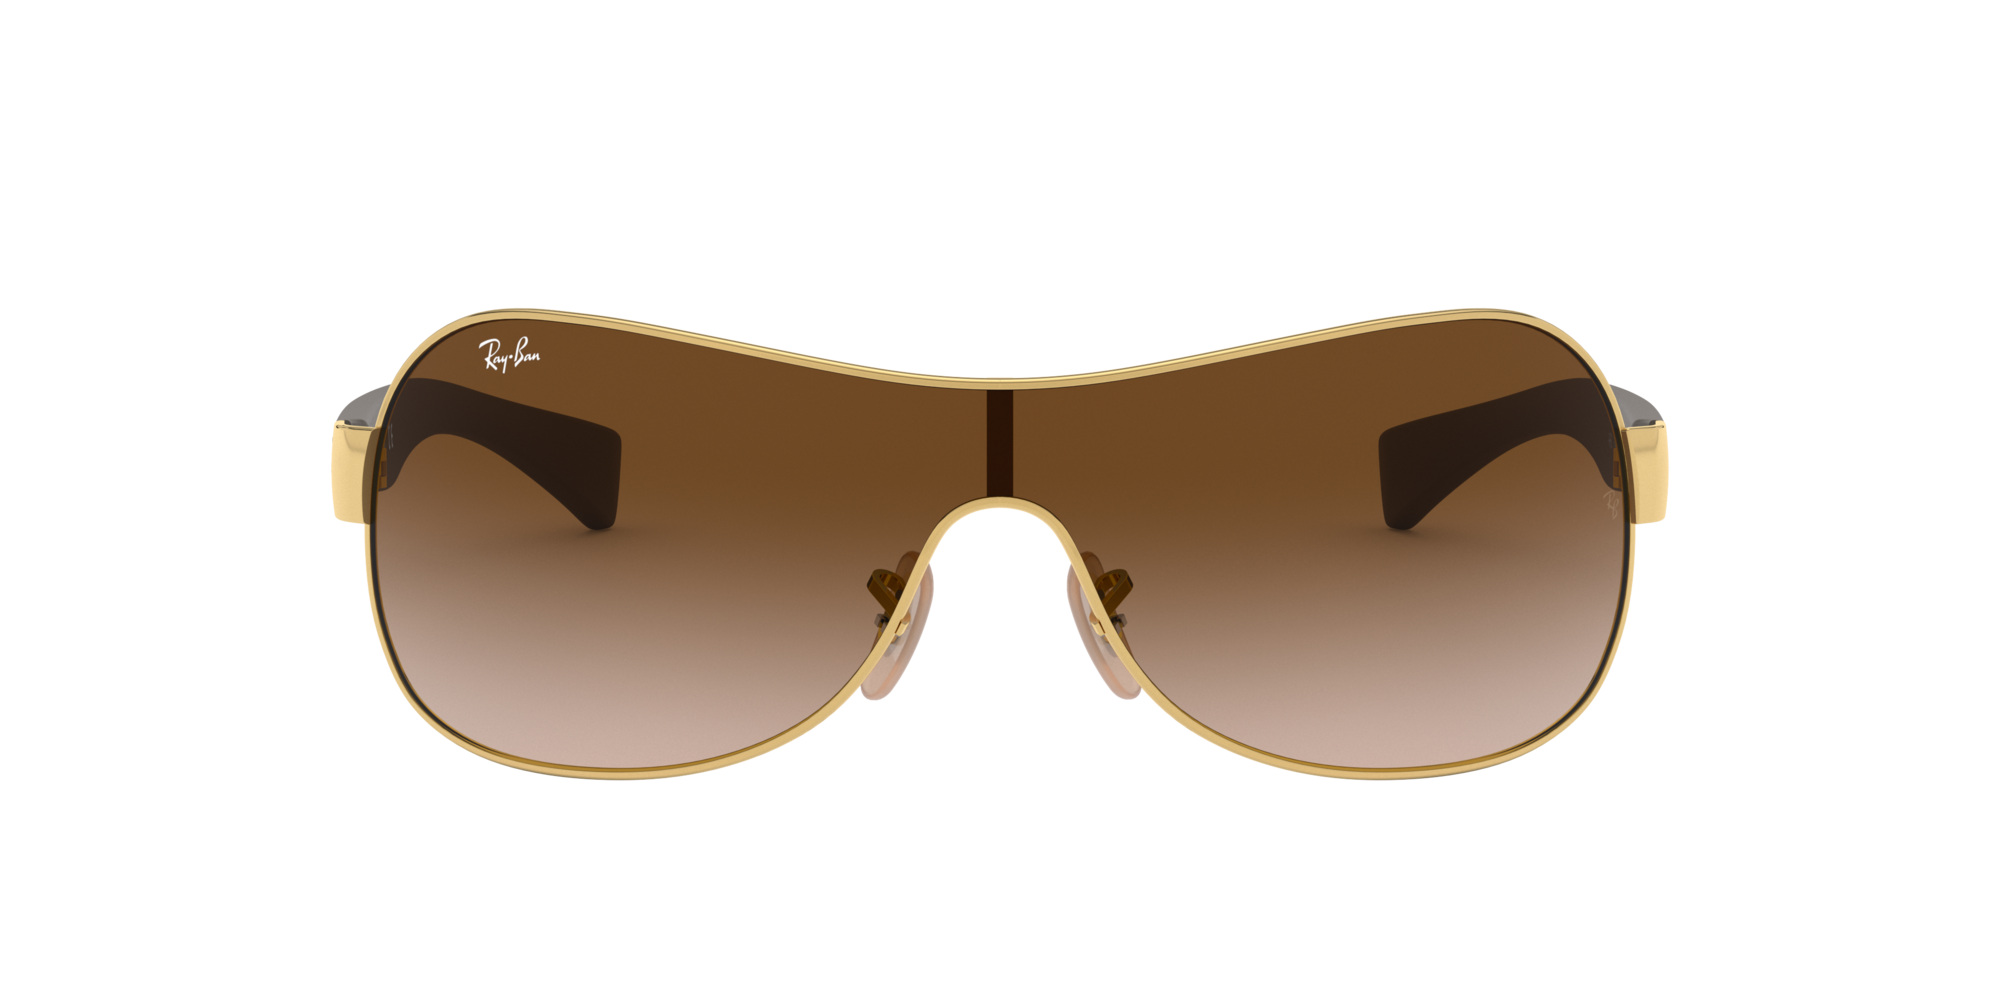 Ray-Ban RB3471 01 Brown Gradient \u0026 Gold 